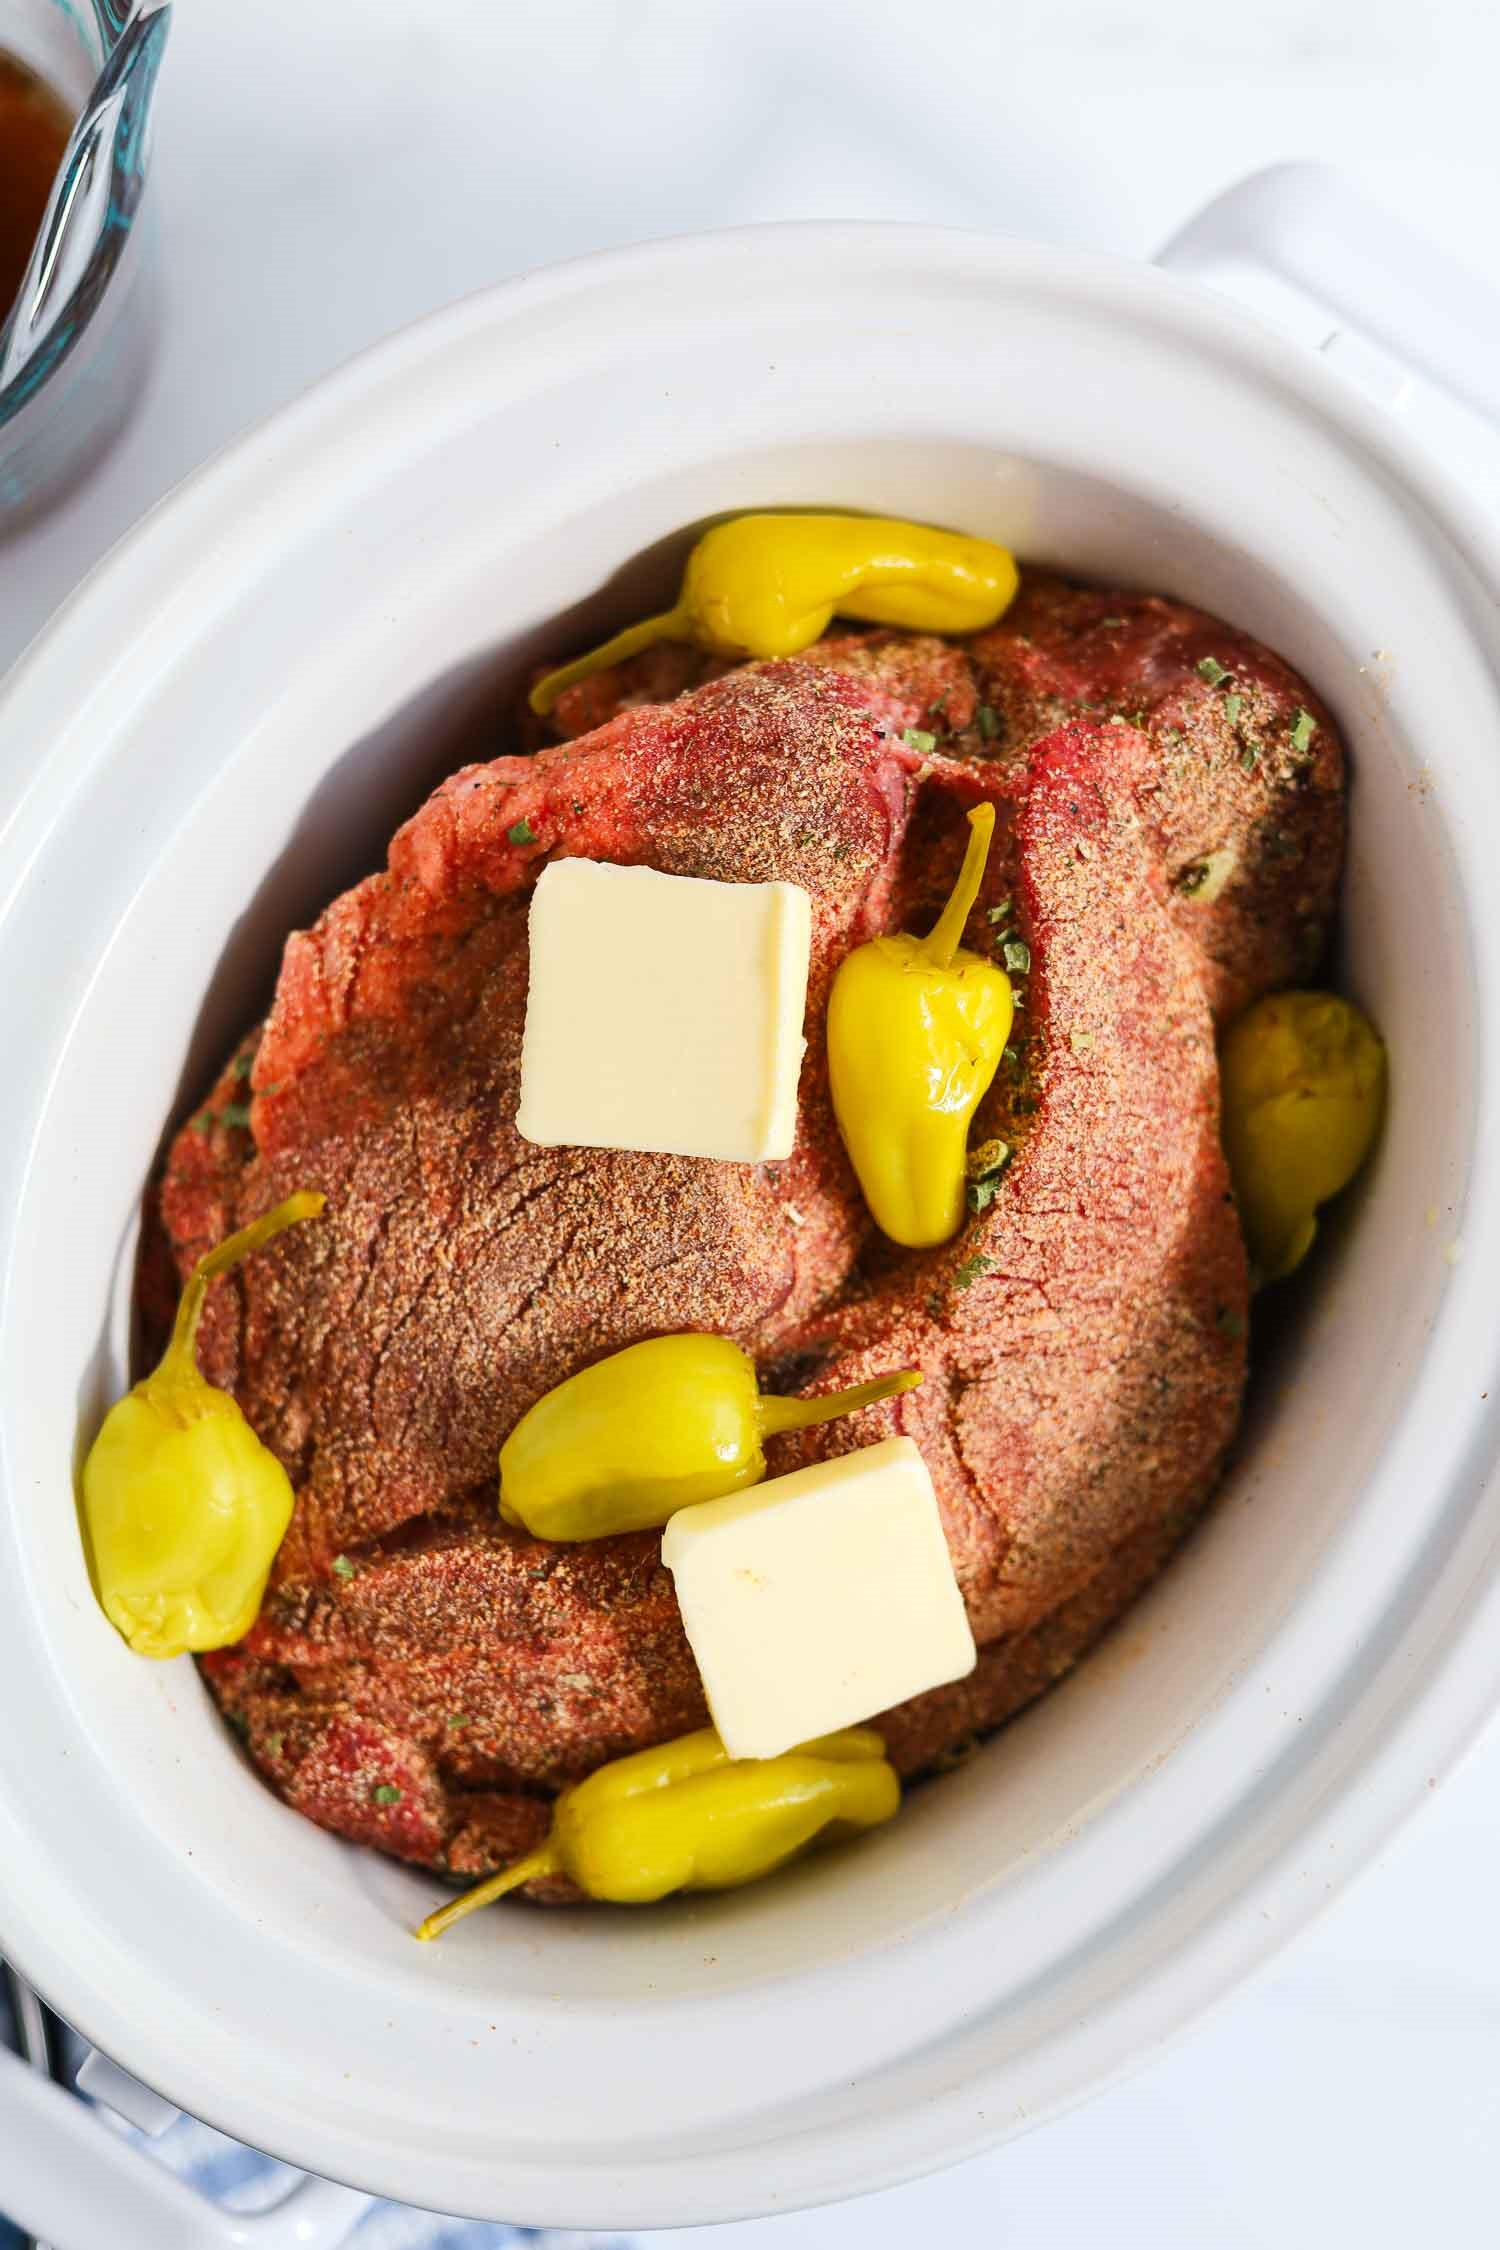 pepperoncini peppers and butter added to the chuck roast in a crockpot.